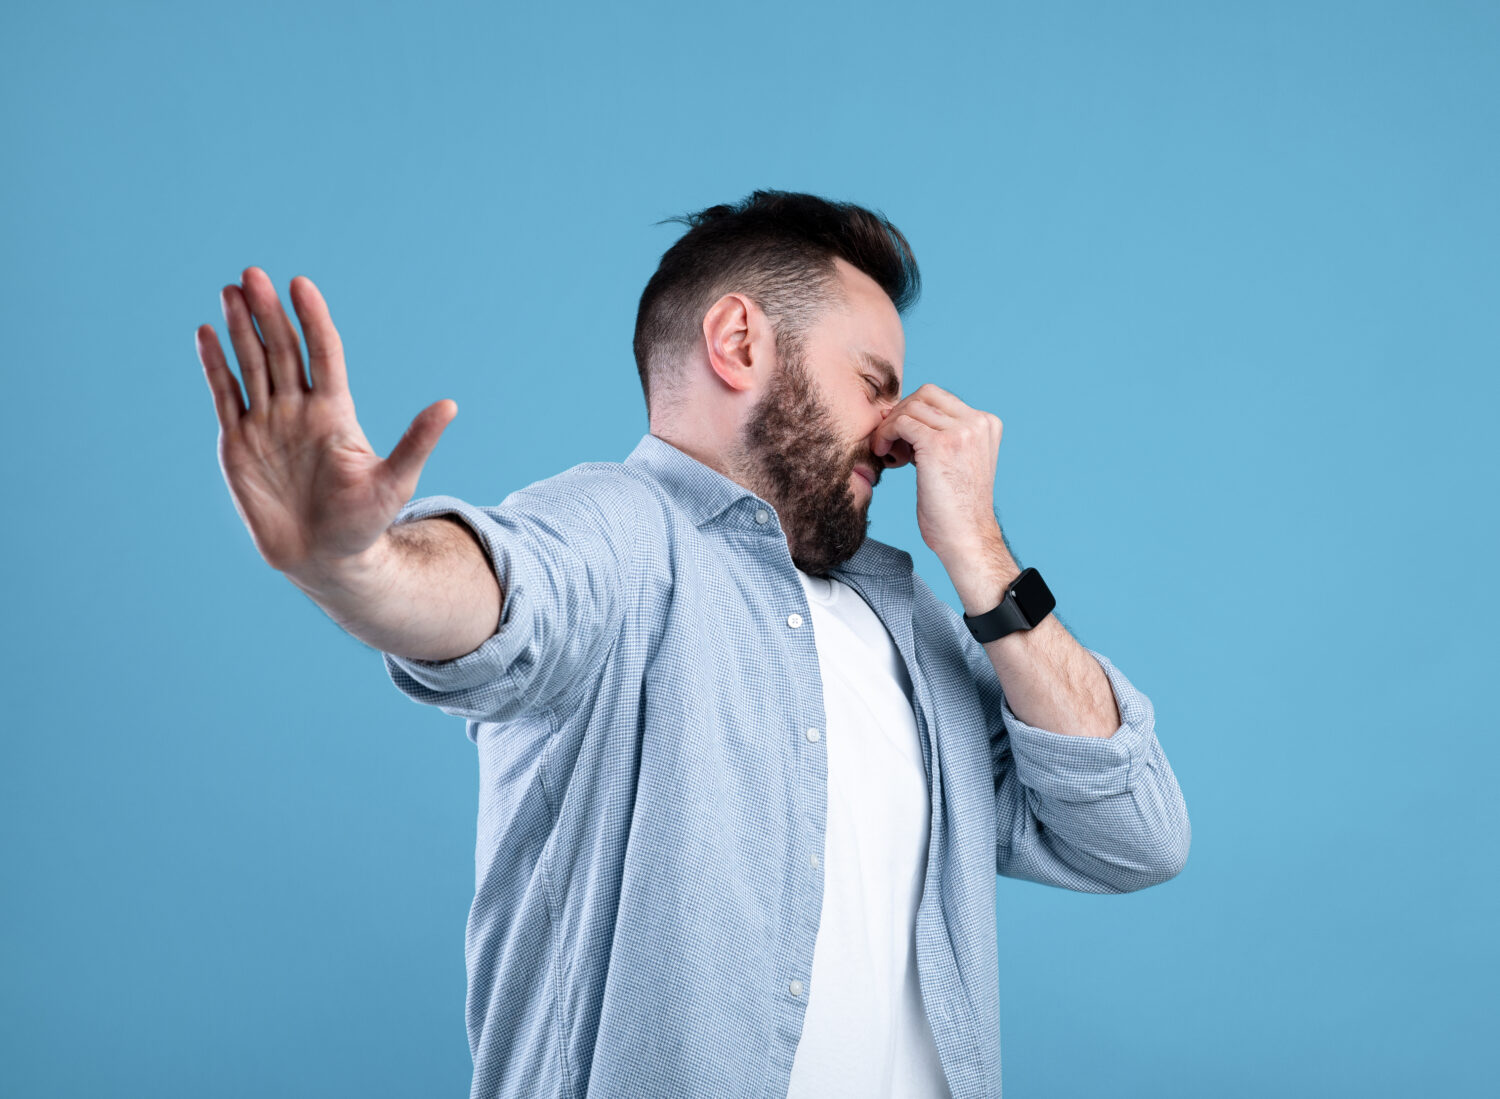 Bad smell concept. Young bearded guy closing his nose and showing STOP gesture, expressing disgust on blue studio background. Millennial man repulsed by toxic odor or terrible perfume